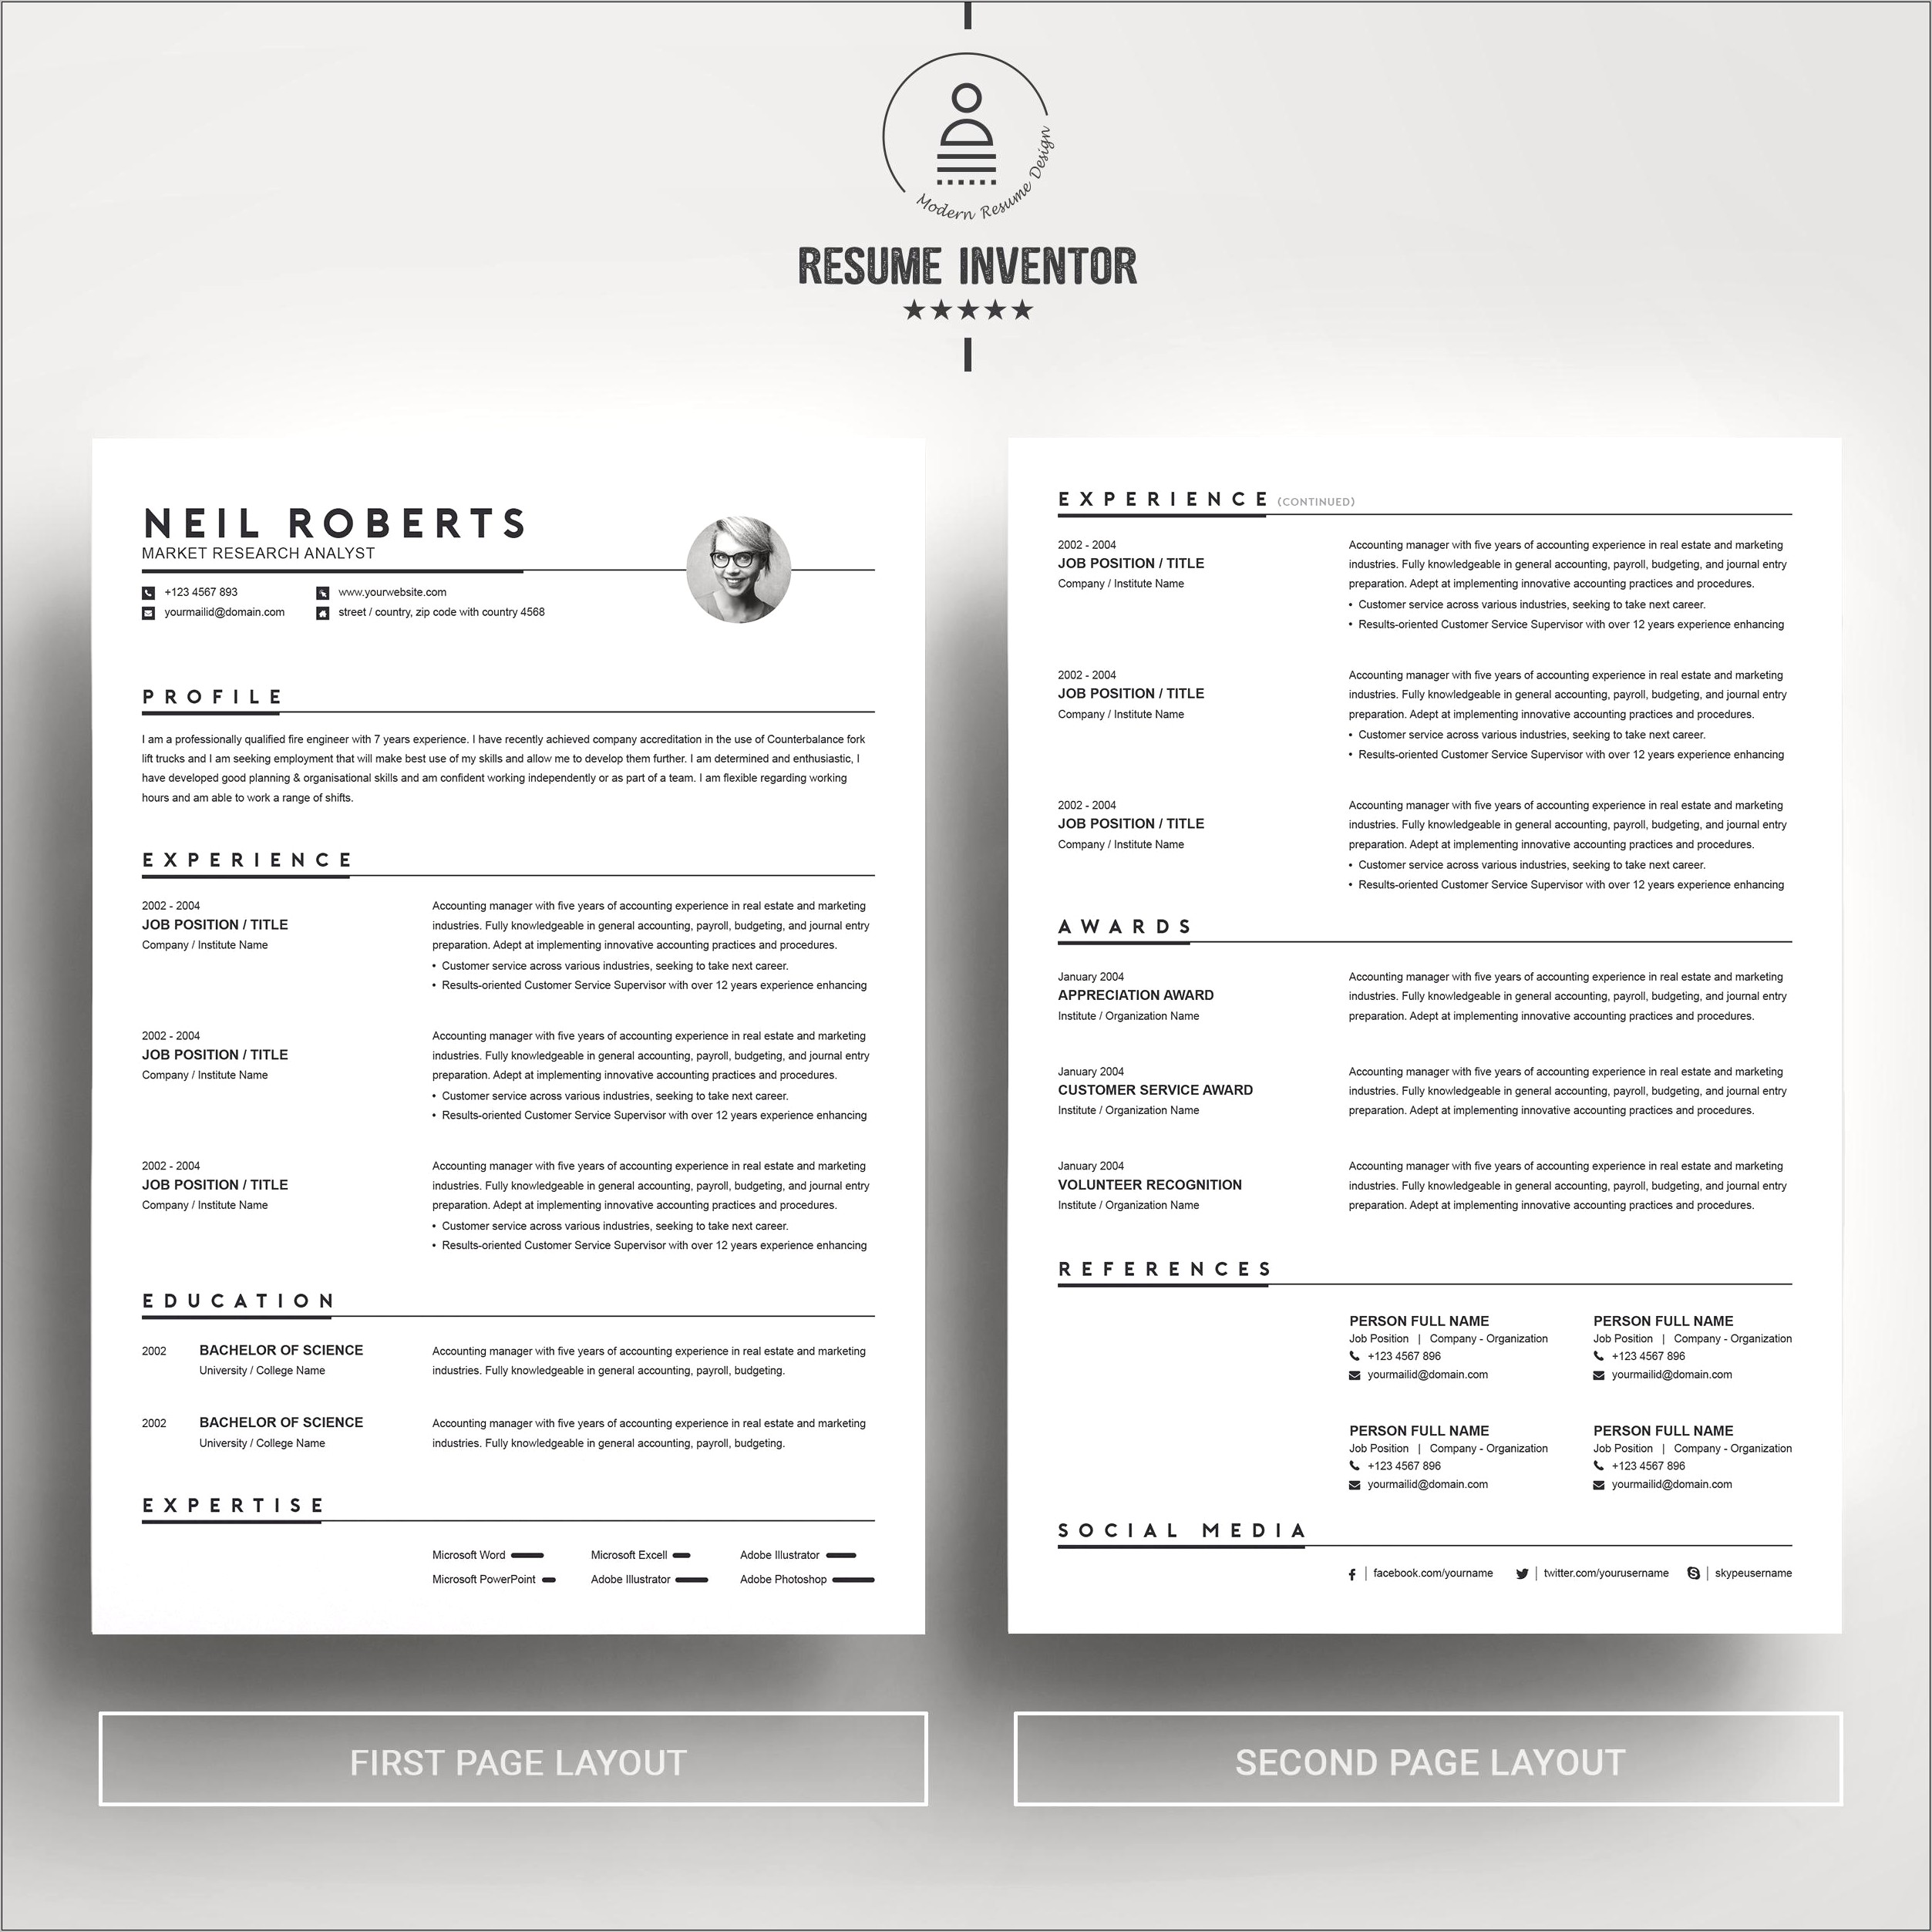 Clean Cv Resume Html Template Download Resume Example Gallery